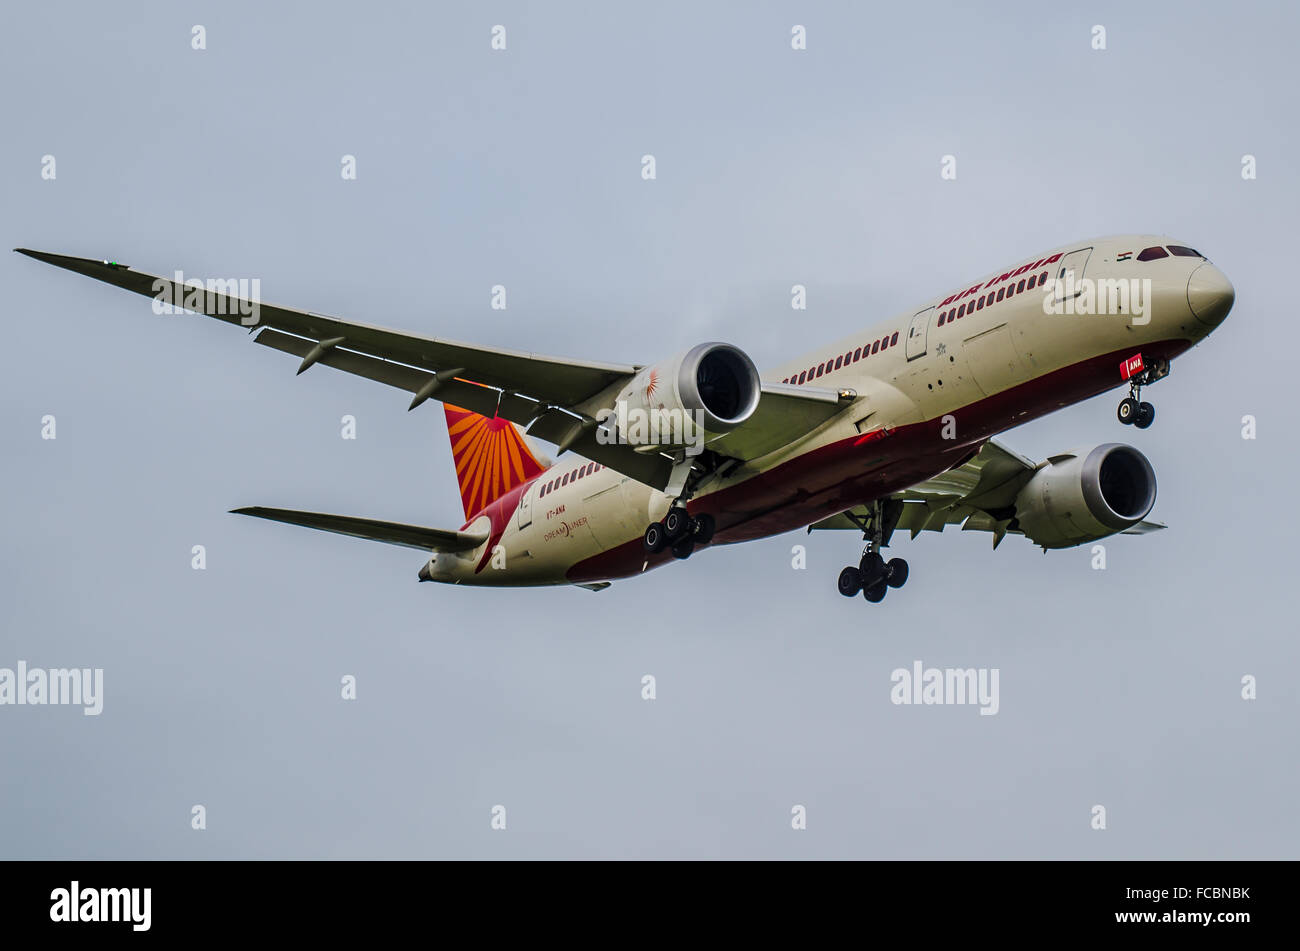 Air India Boeing 787 -8 Dreamliner - airliner jet plane VT-ANA landing at London Heathrow Airport in overcast weather Stock Photo